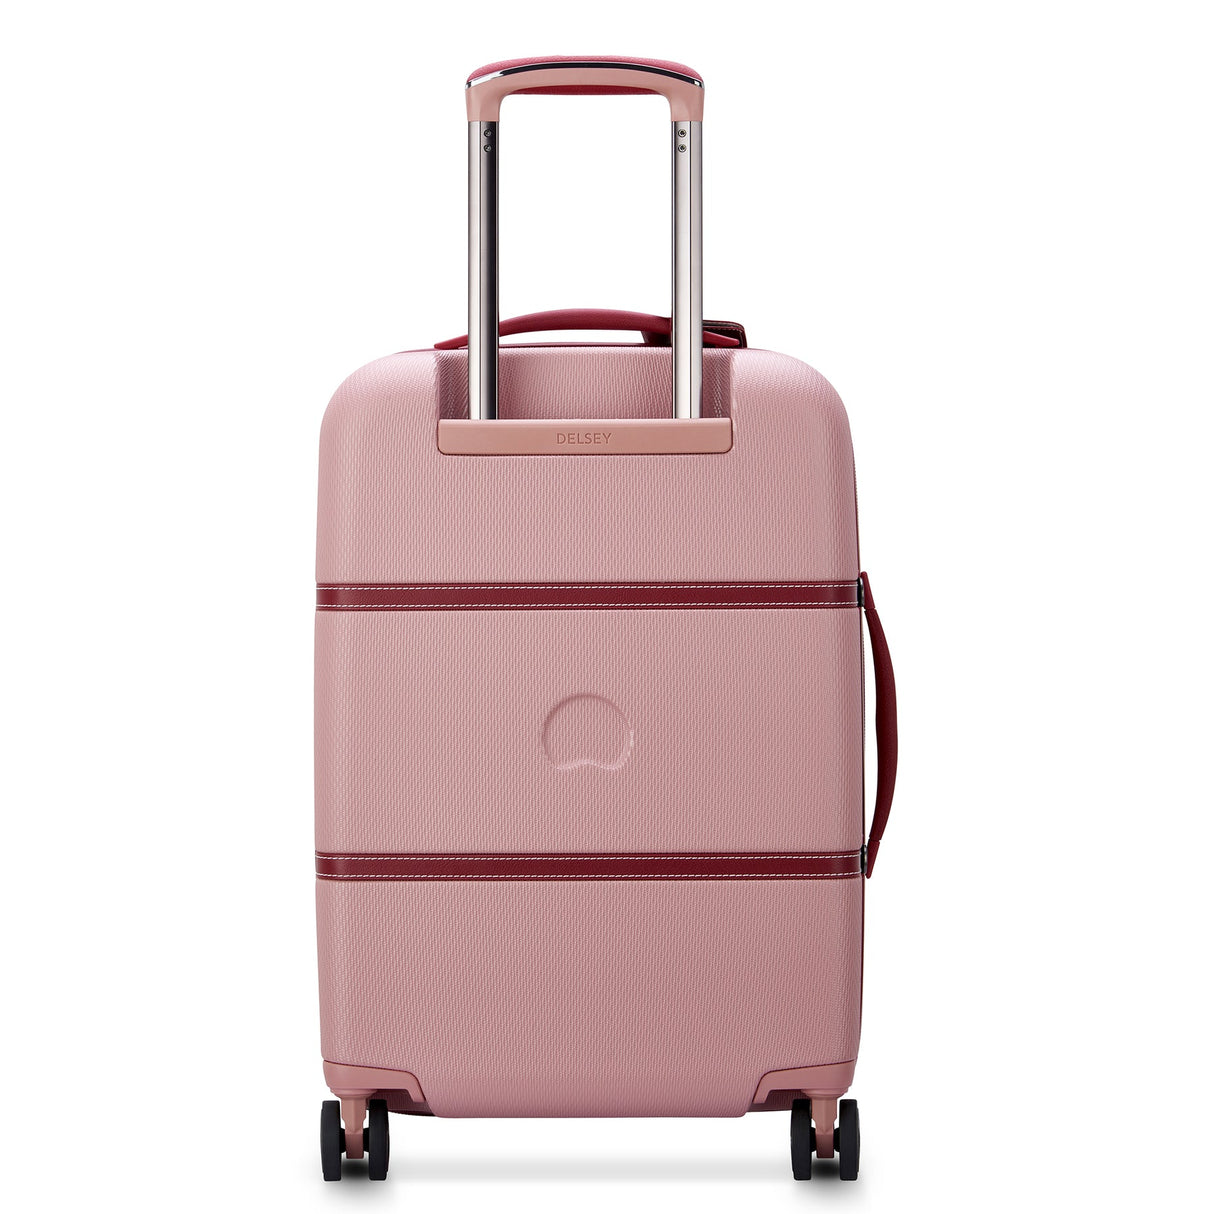 Delsey Chatelet Air 2.0 Carry-On Spinner , , delsey-chatelet-air-2.0-40167680509-12_1800x1800_ac7d47b2-dadd-4b00-a8c8-9ec71e0ded8c